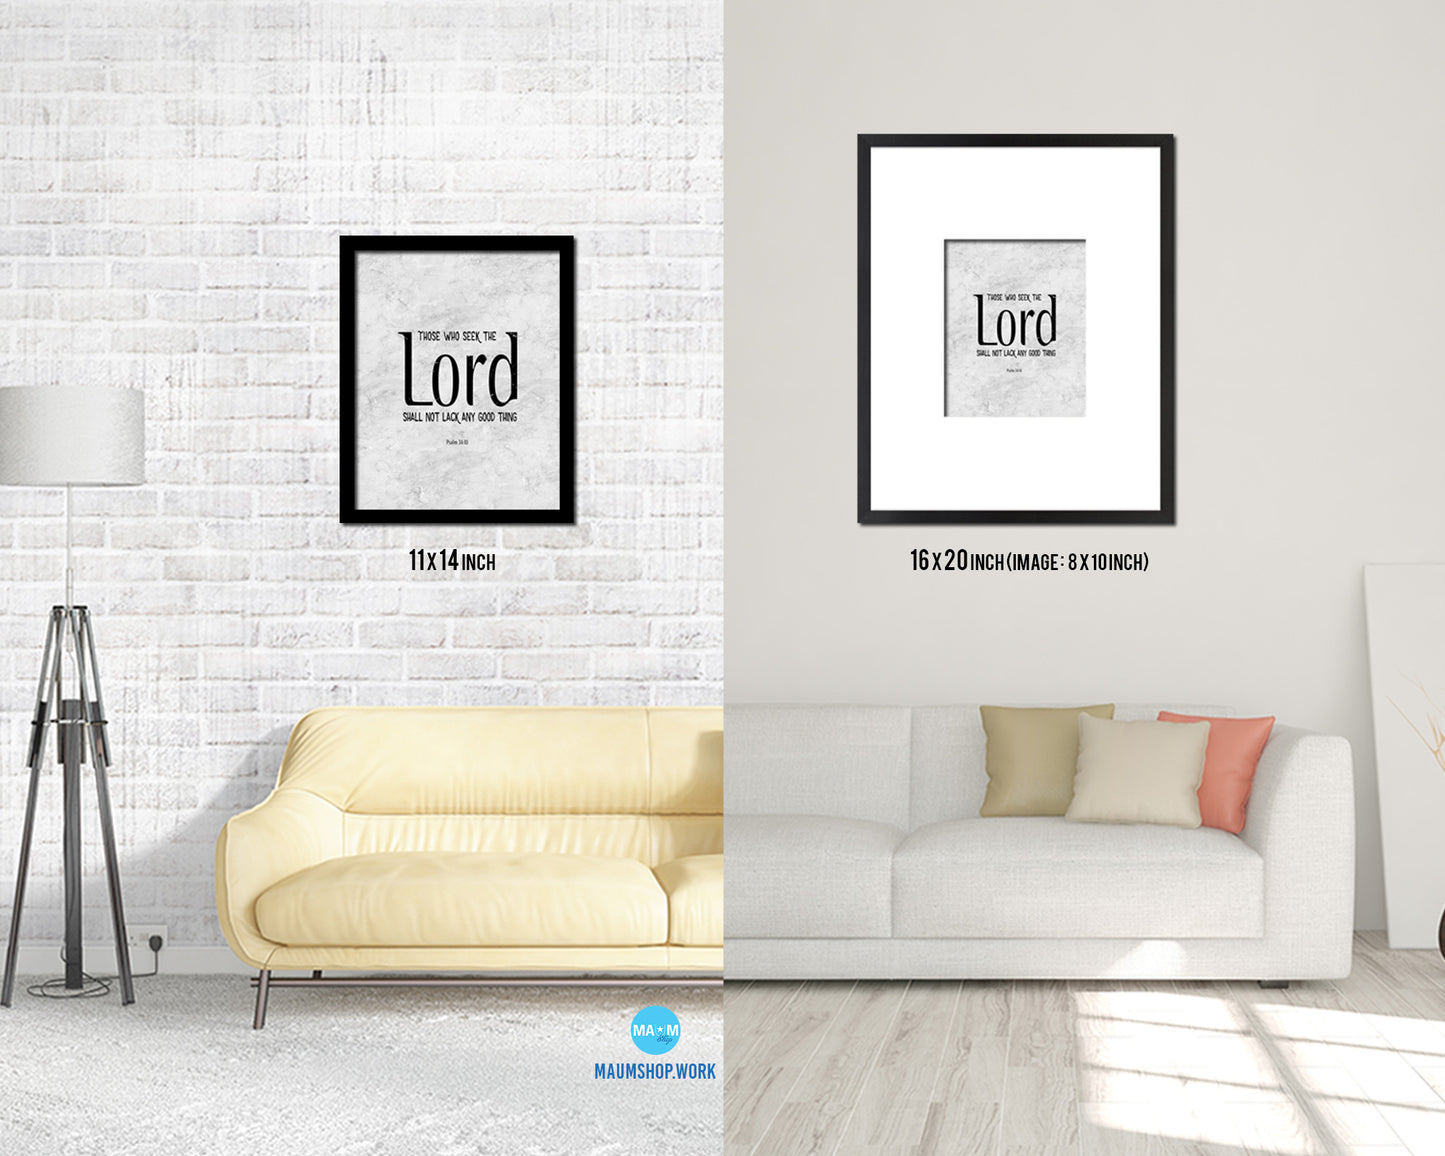 Those who seek the Lord shall not lack any good thing, Psalm 34:10 Bible Scripture Verse Framed Art